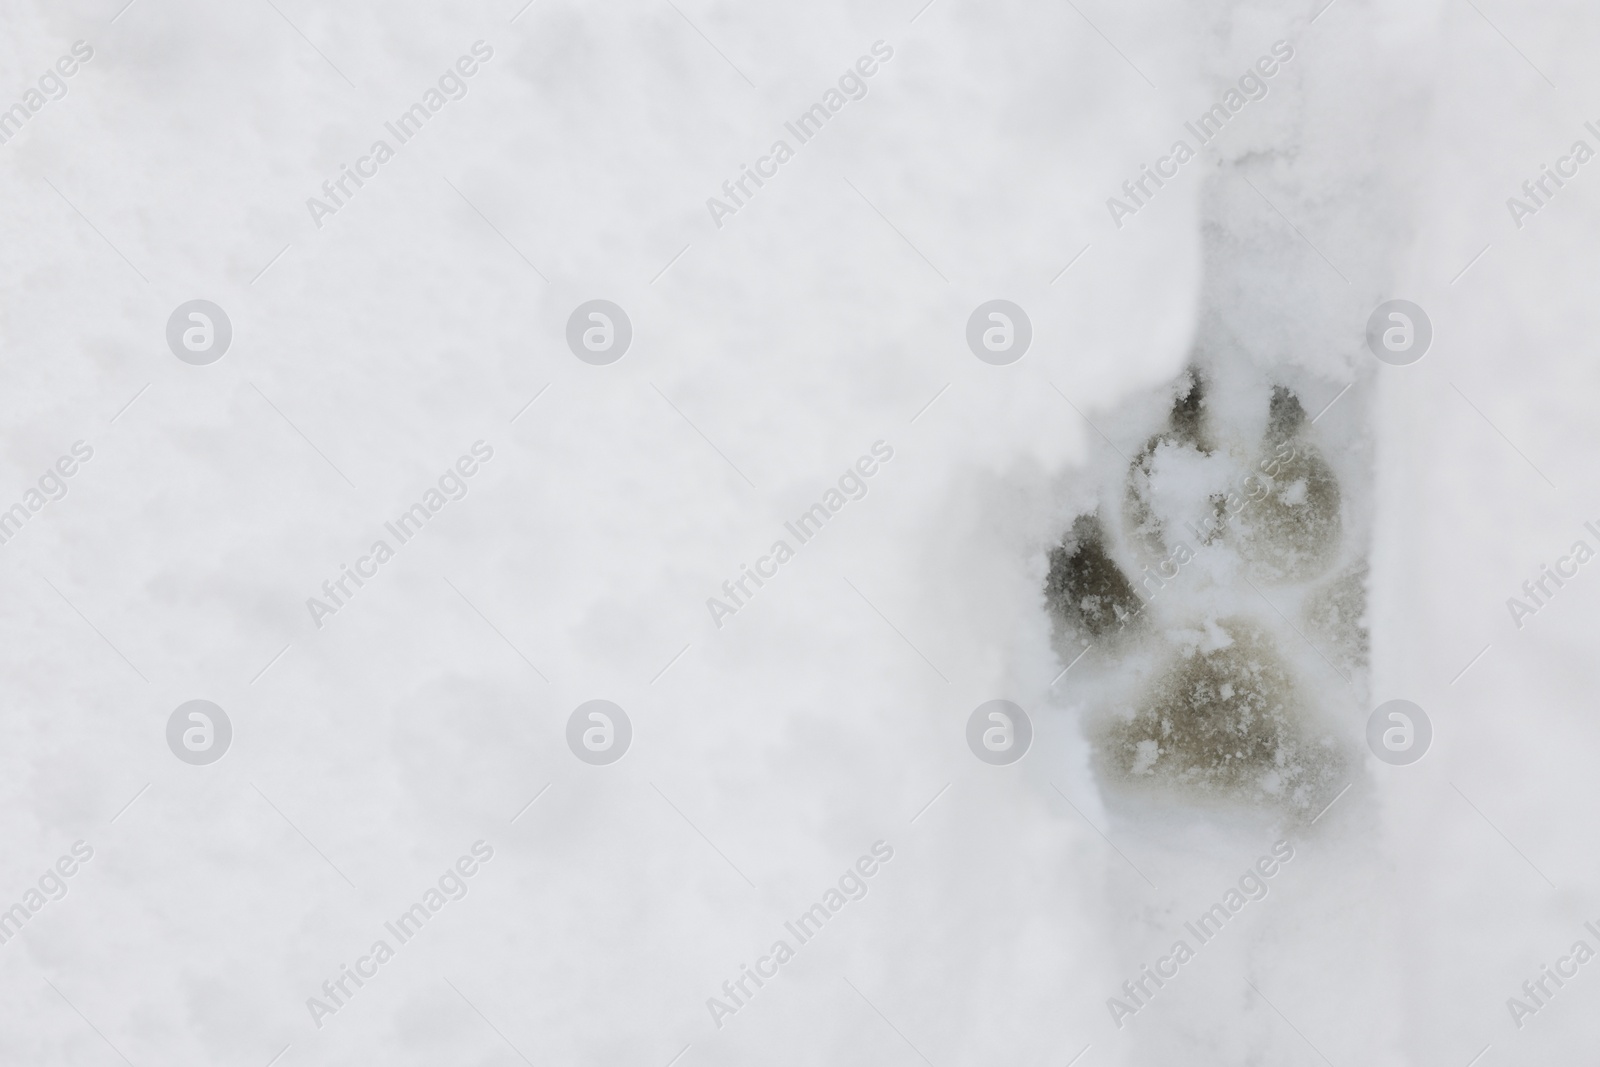 Photo of Dog paw print on snow outdoors, top view. Space for text